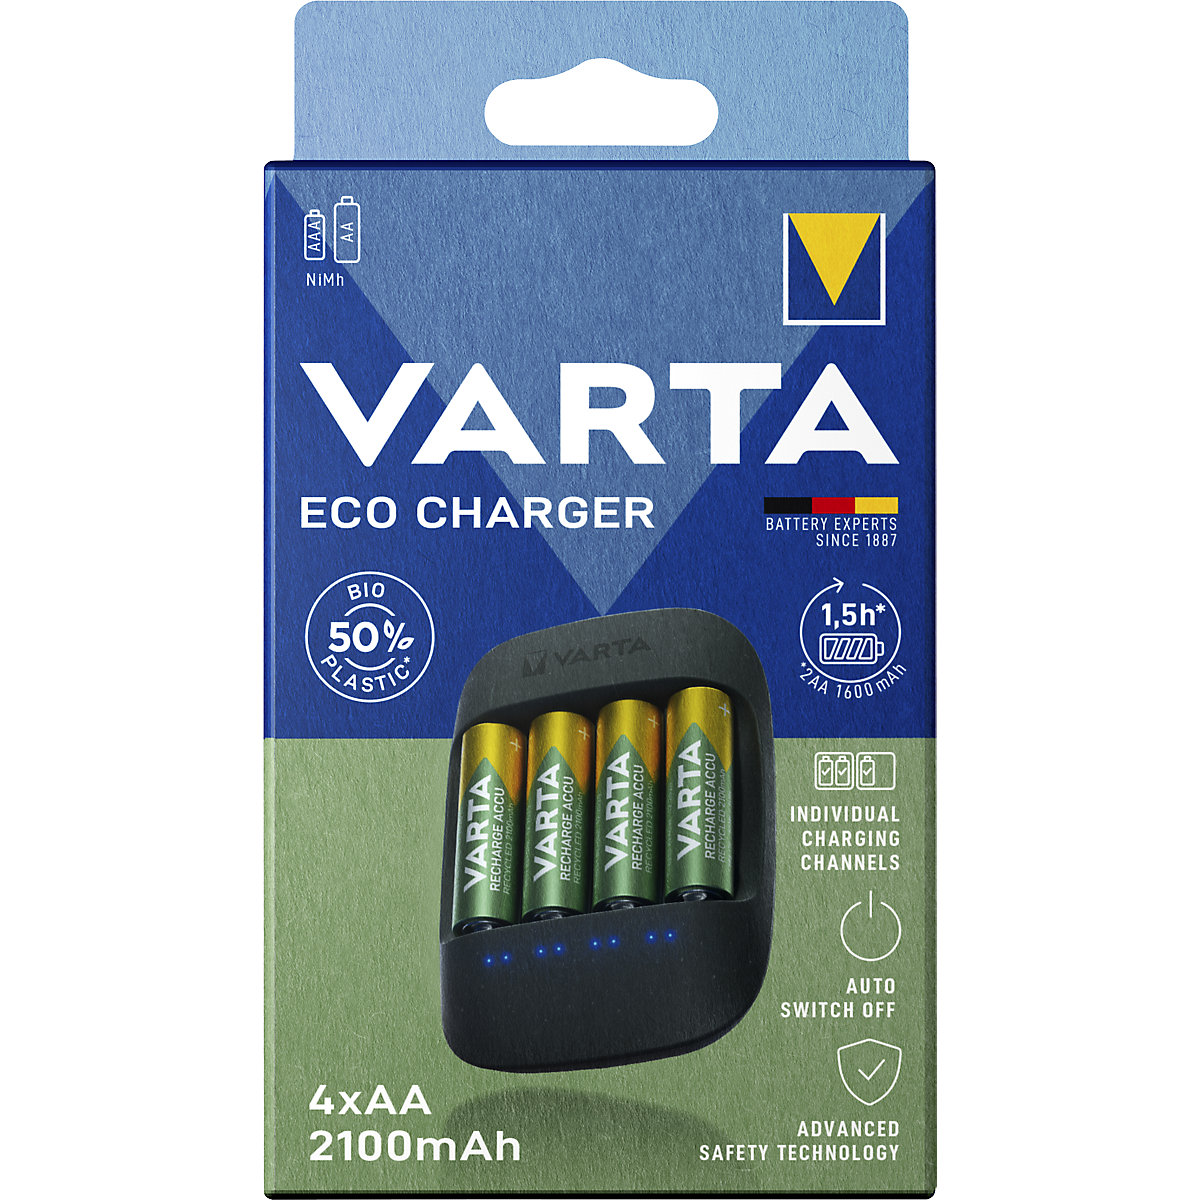 ECO CHARGER charger – VARTA